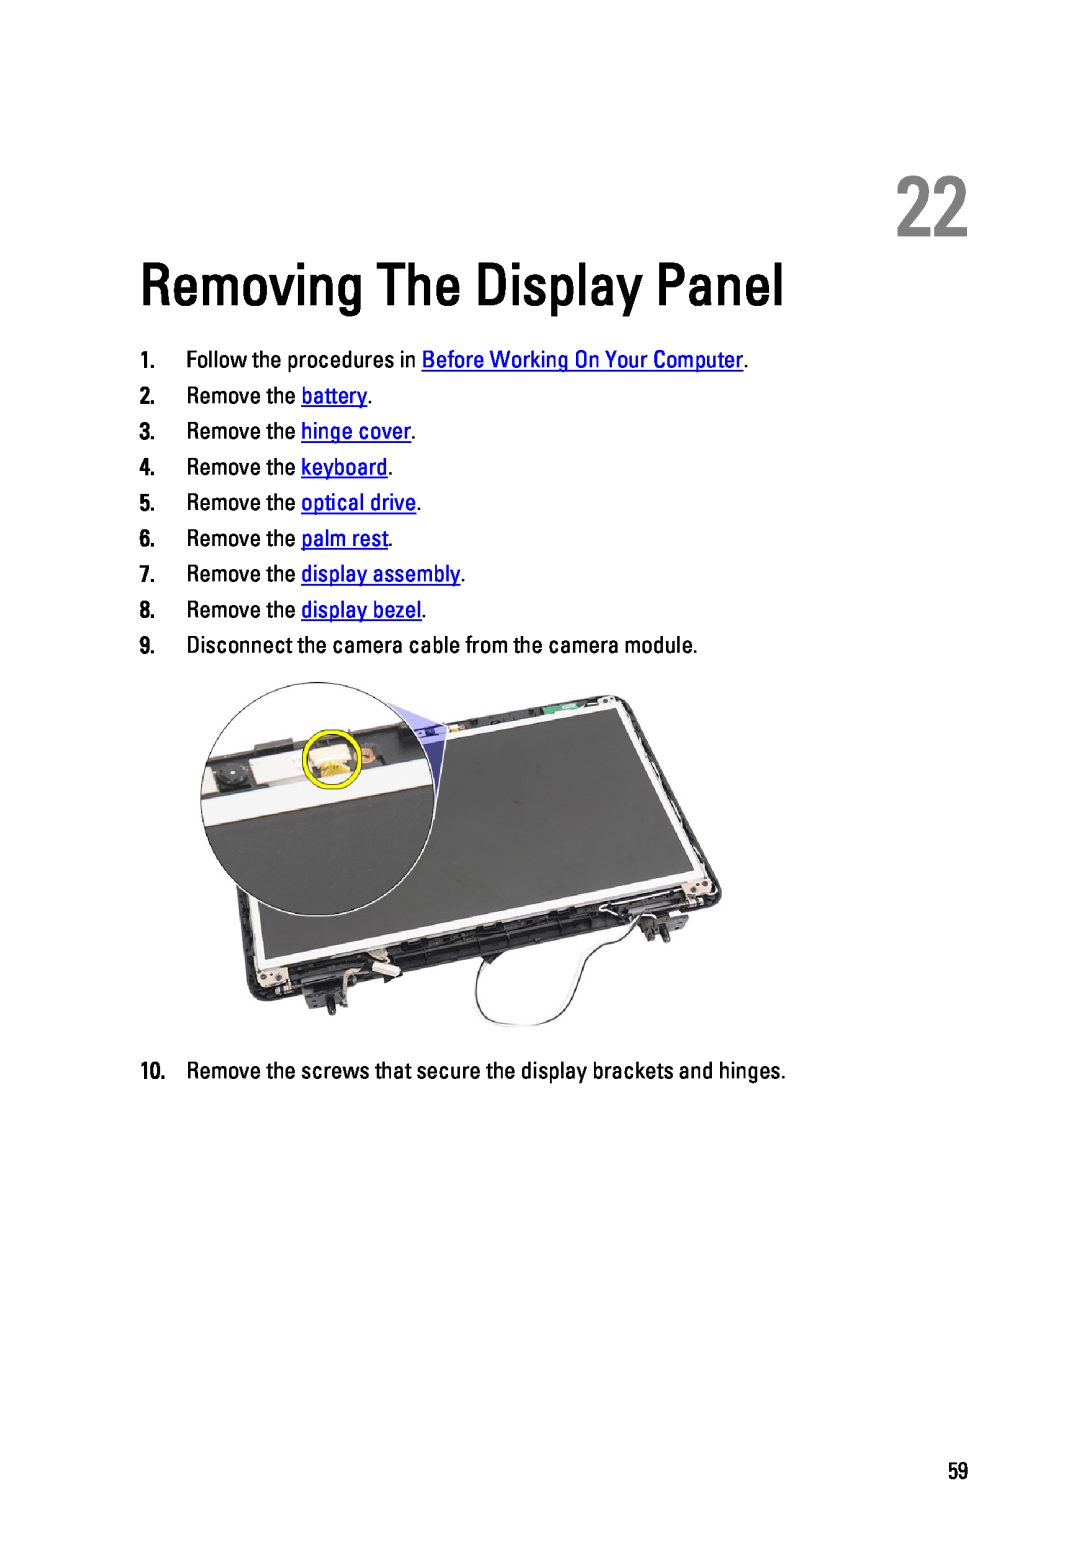 Dell P22G Removing The Display Panel, Remove the display assembly 8. Remove the display bezel, Remove the keyboard 